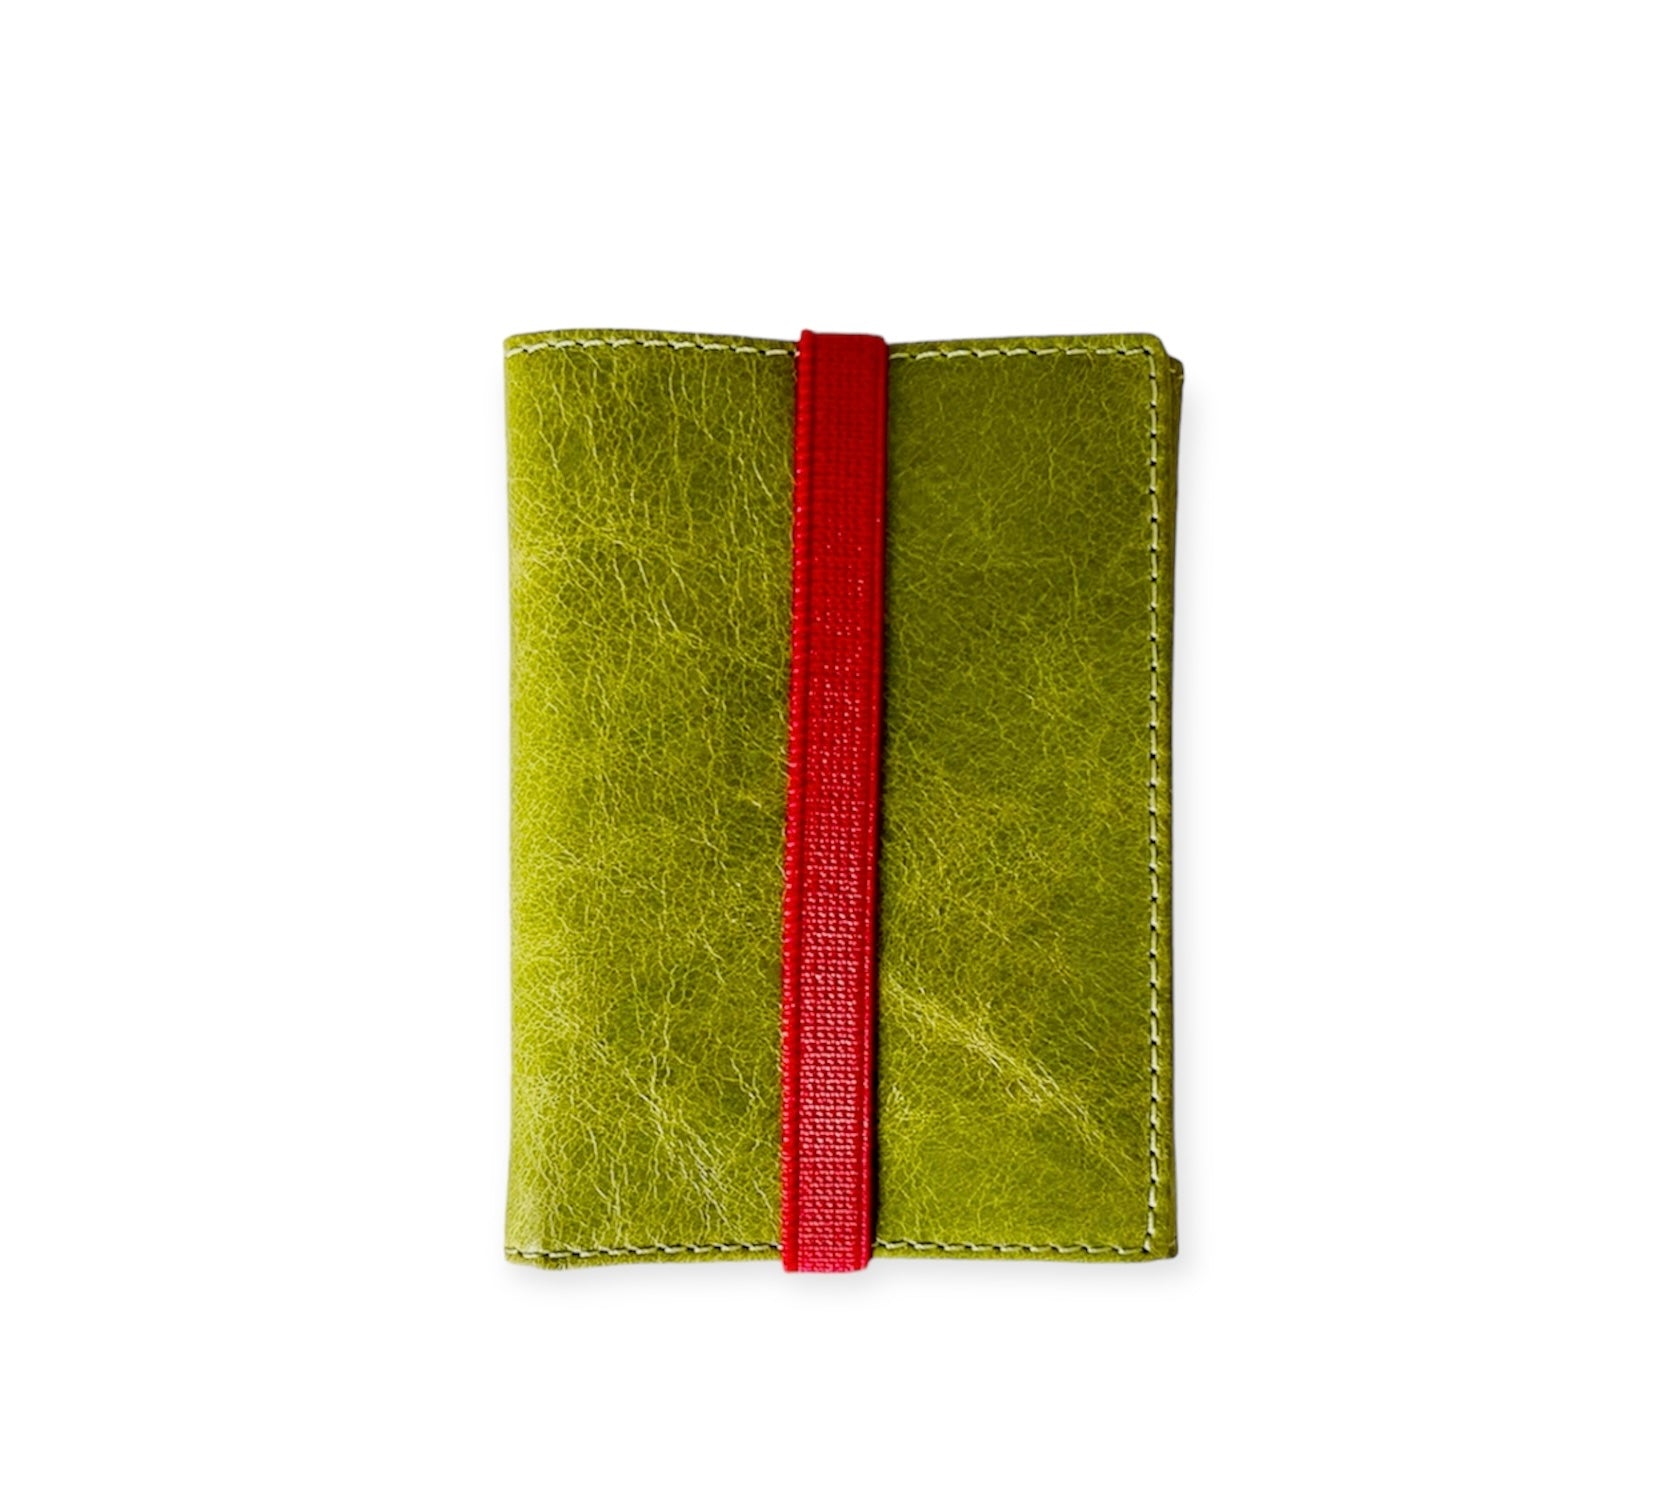 Small green and blue Chinese wallet, Icon Piamonte 950.